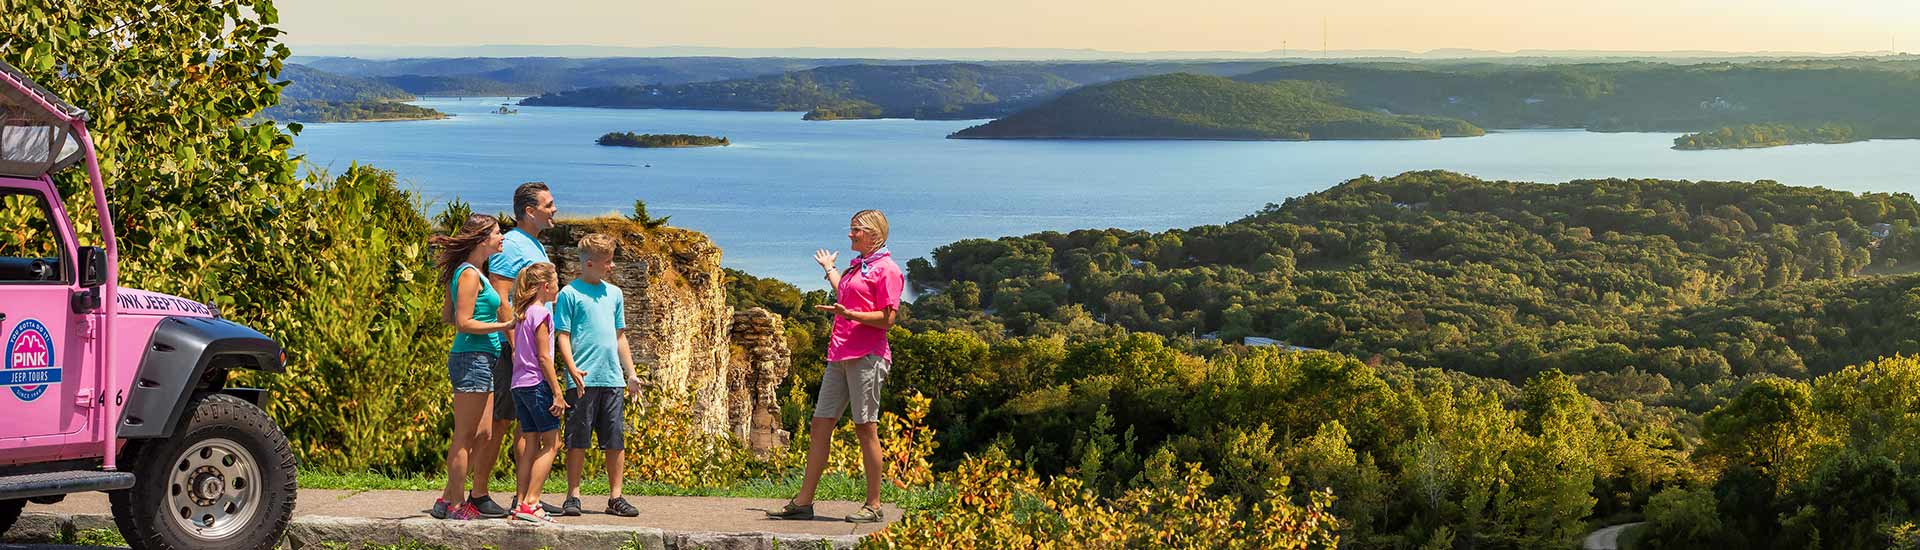 Pink® Jeep® Tours Branson tour guide talking with guests at Baird Mountain viewpoint overlooking Table Rock Lake.